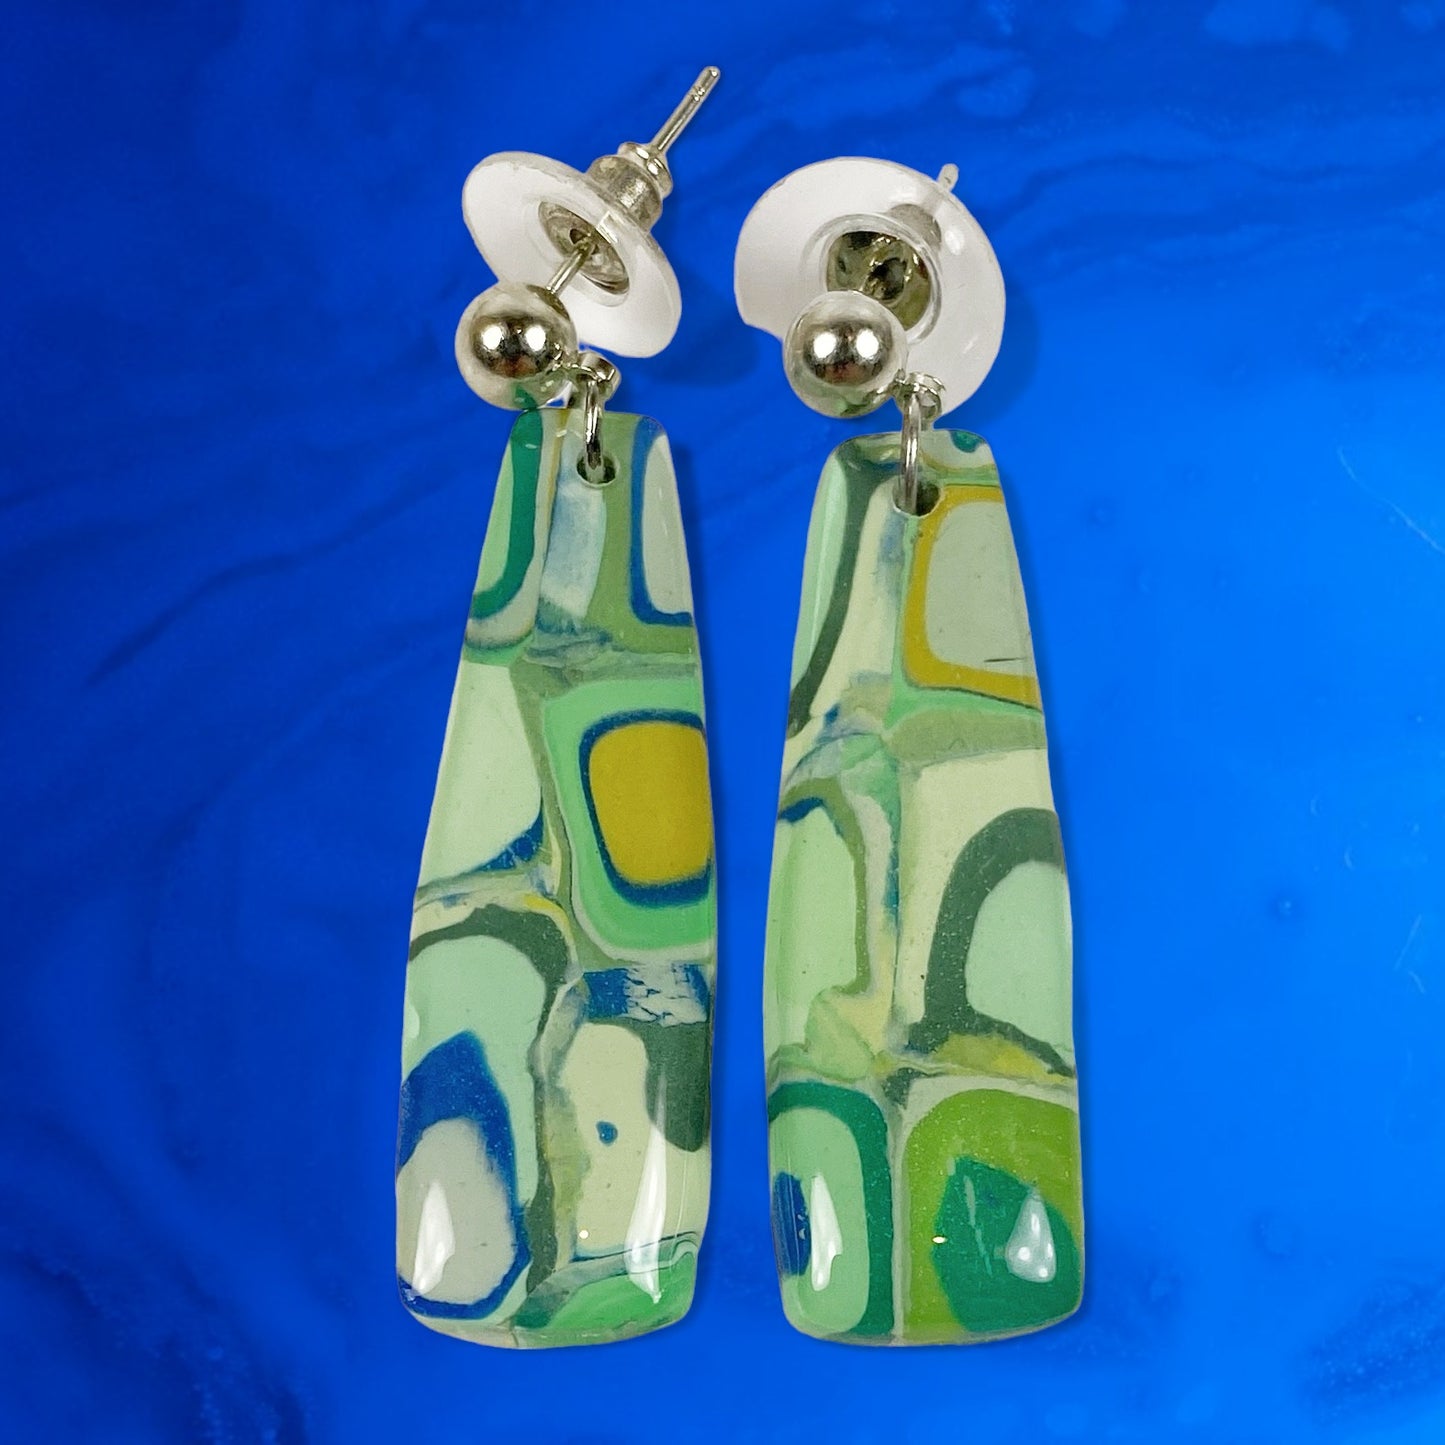 Squares of Green Polymer Clay Handmade Dangle Earrings on a bright blue background